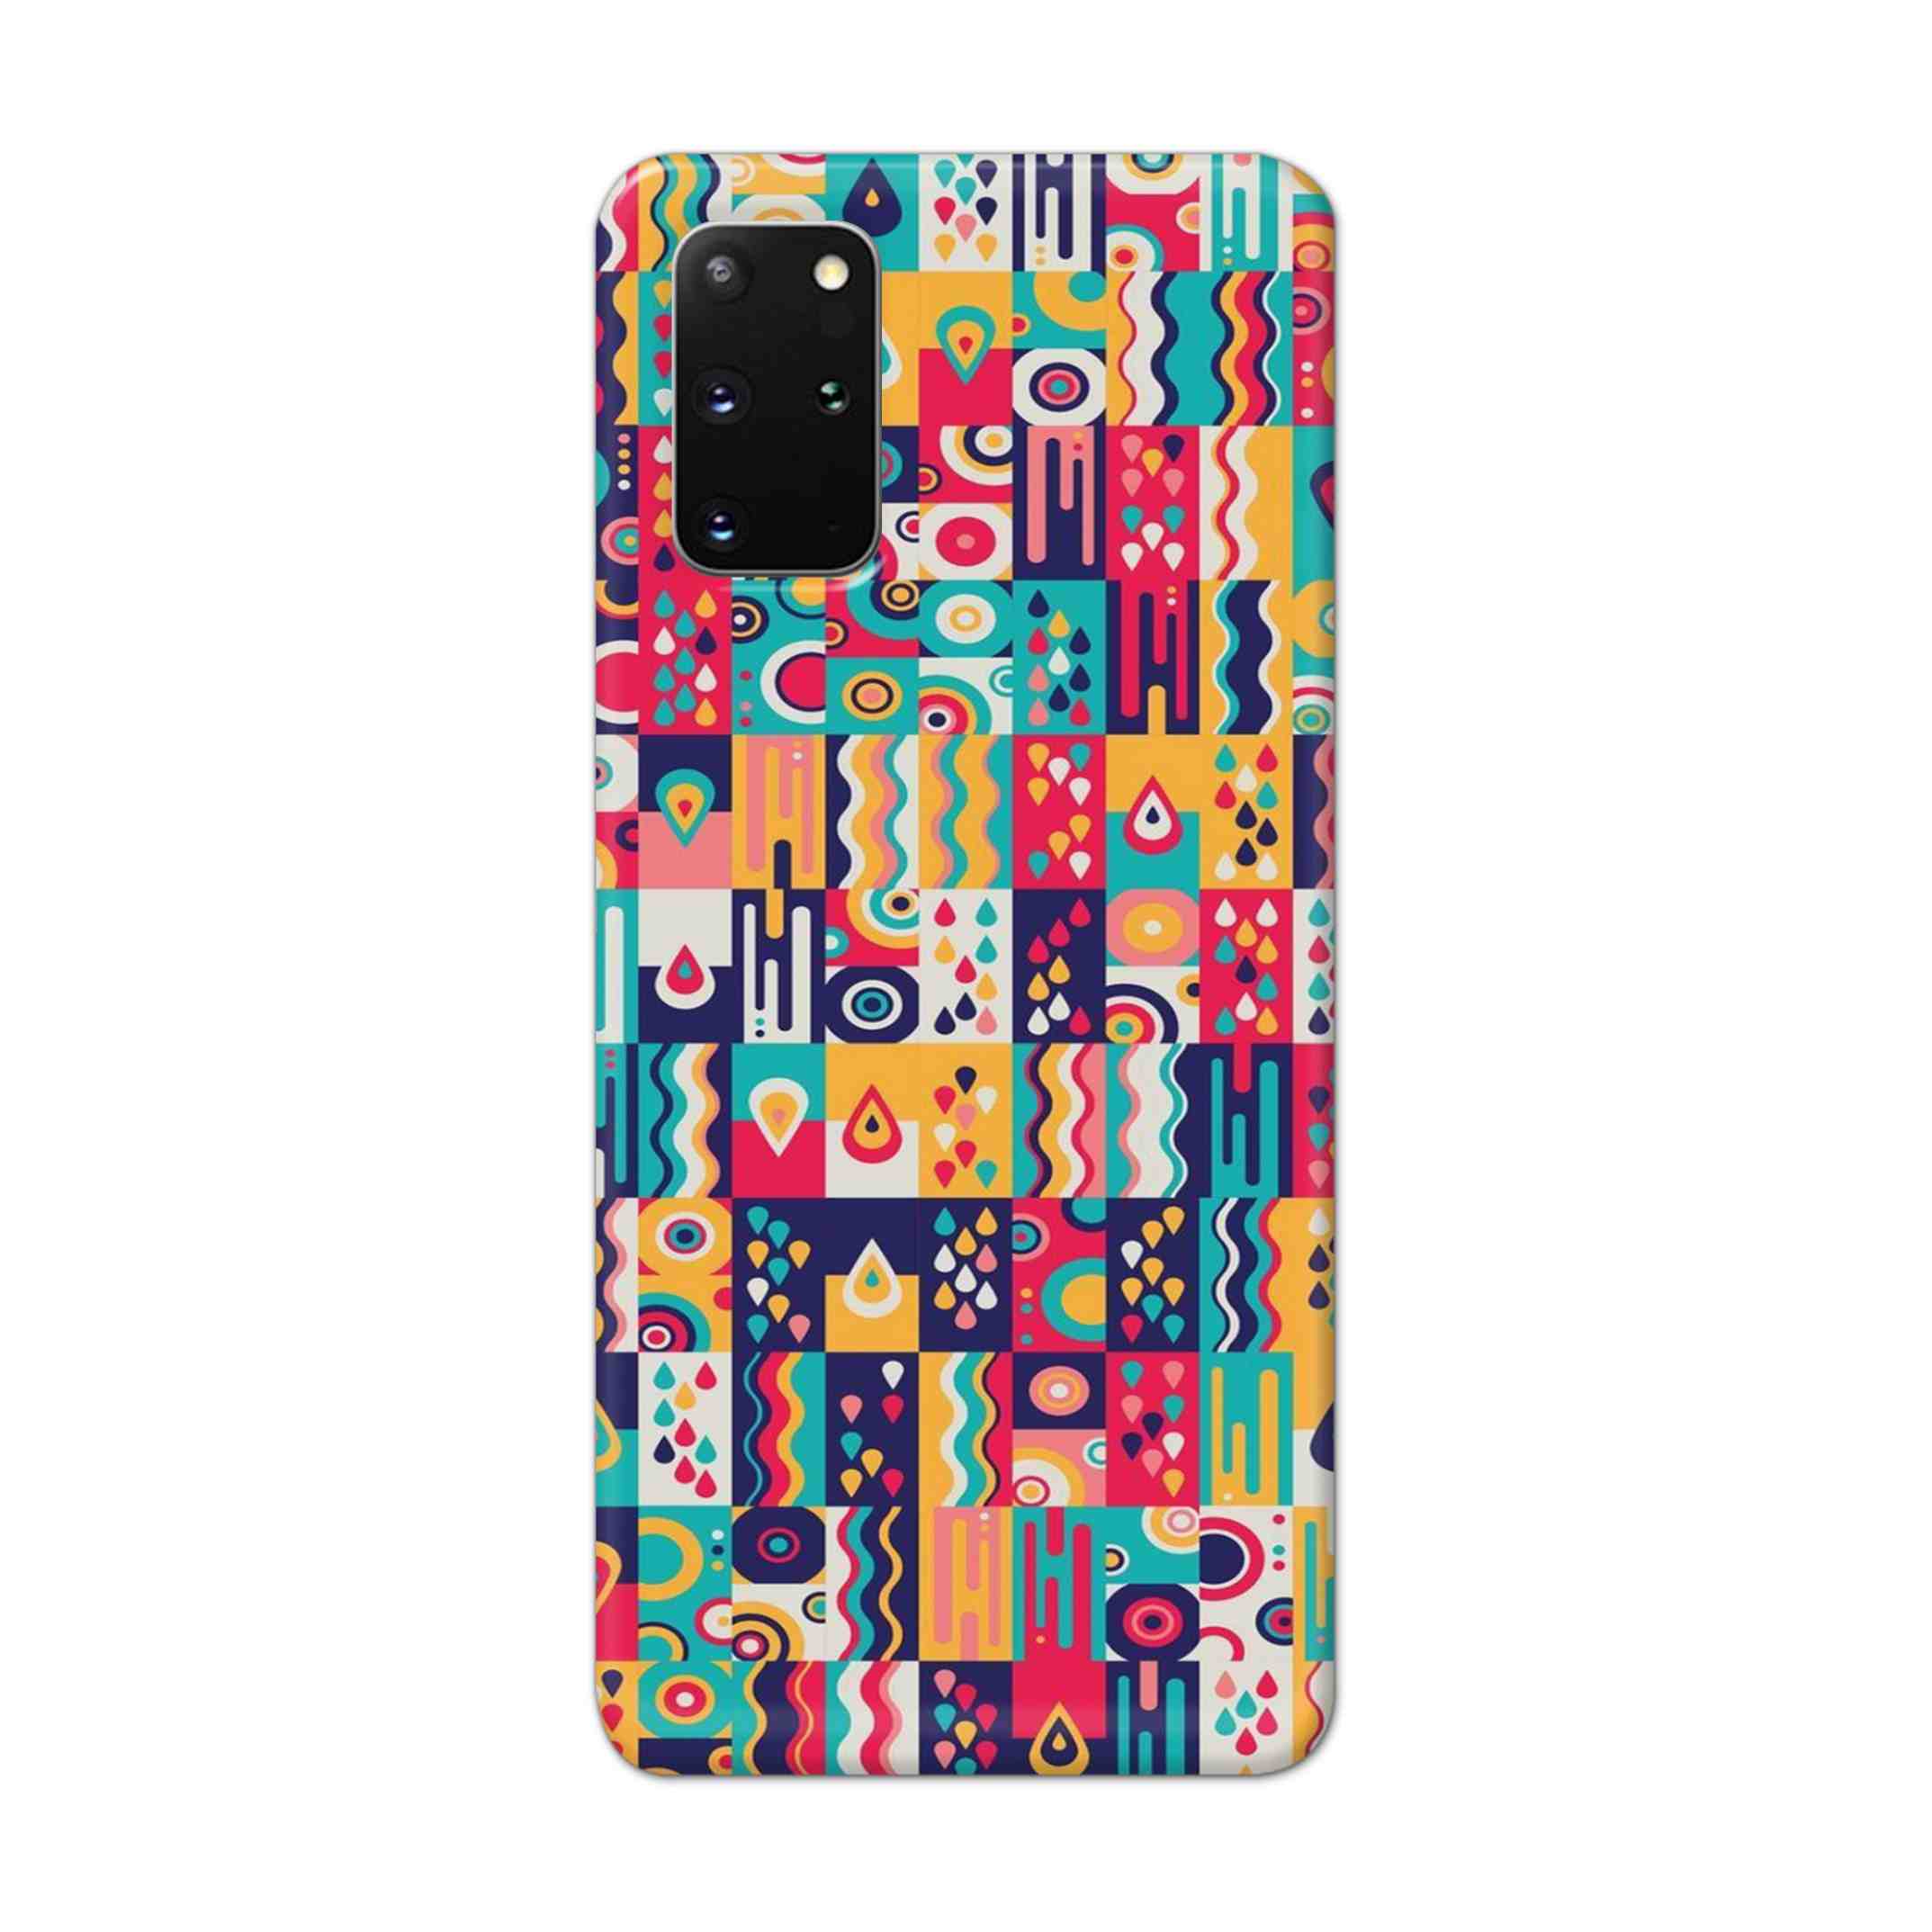 Buy Art Hard Back Mobile Phone Case Cover For Samsung Galaxy S20 Plus Online